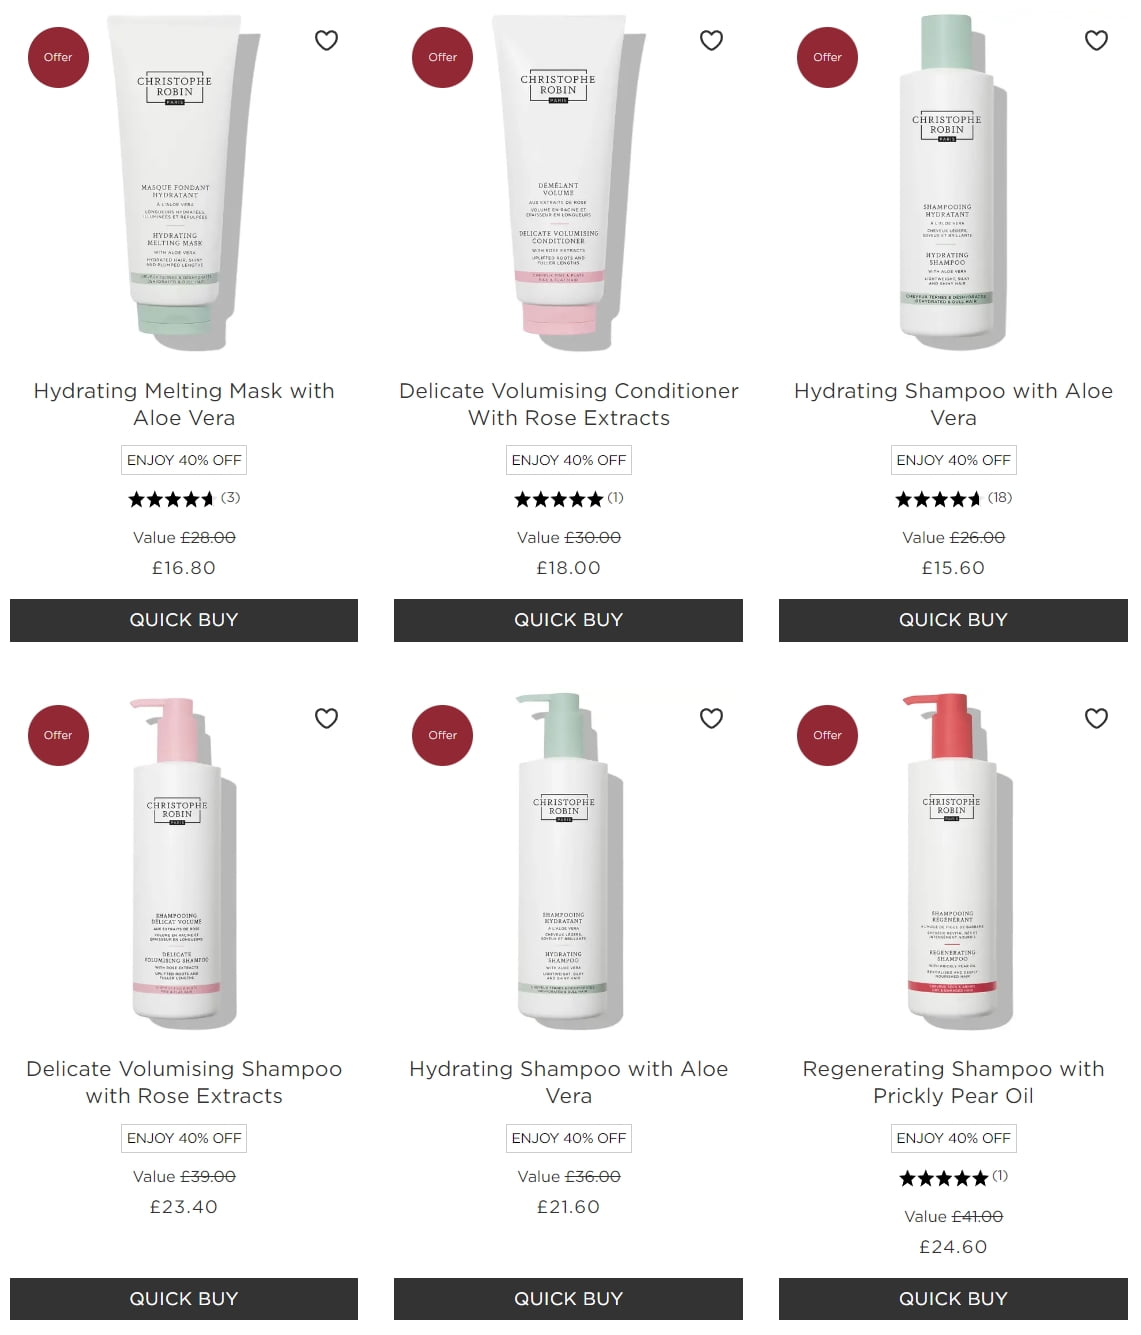 40% off Shampoo and Conditioner at Christophe Robin